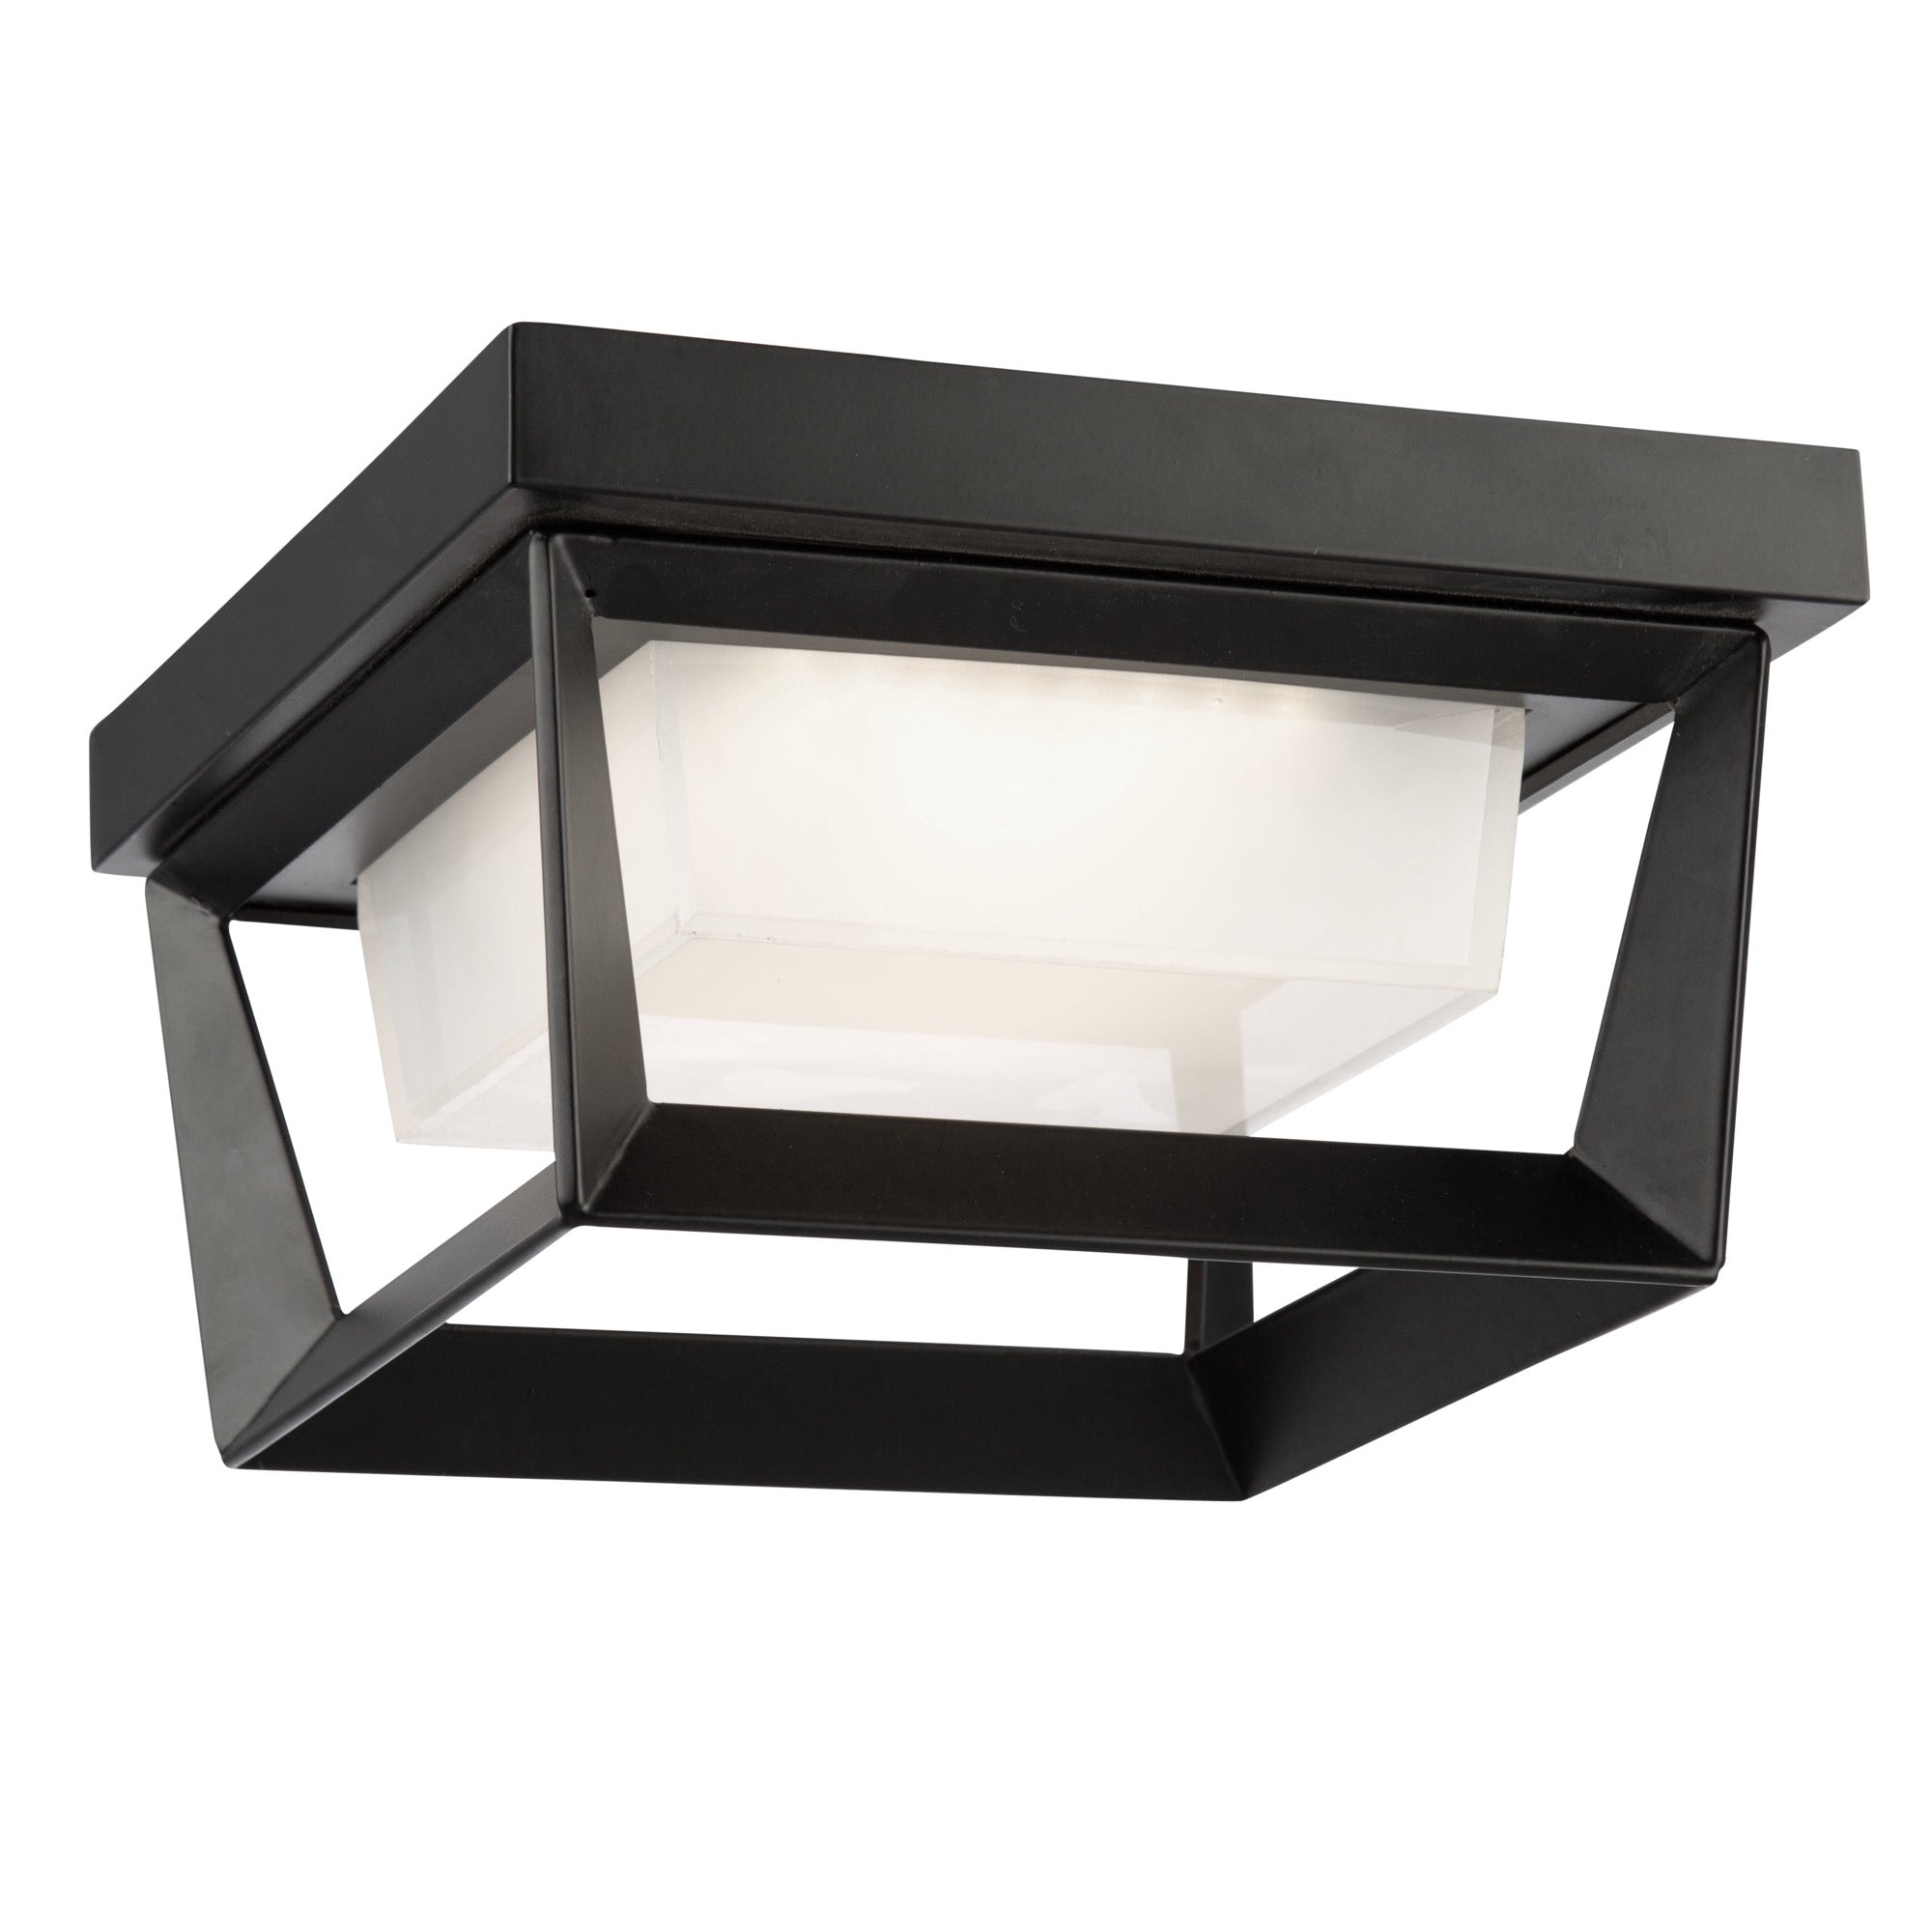 Waterbury 12W LED Outdoor Ceiling Light